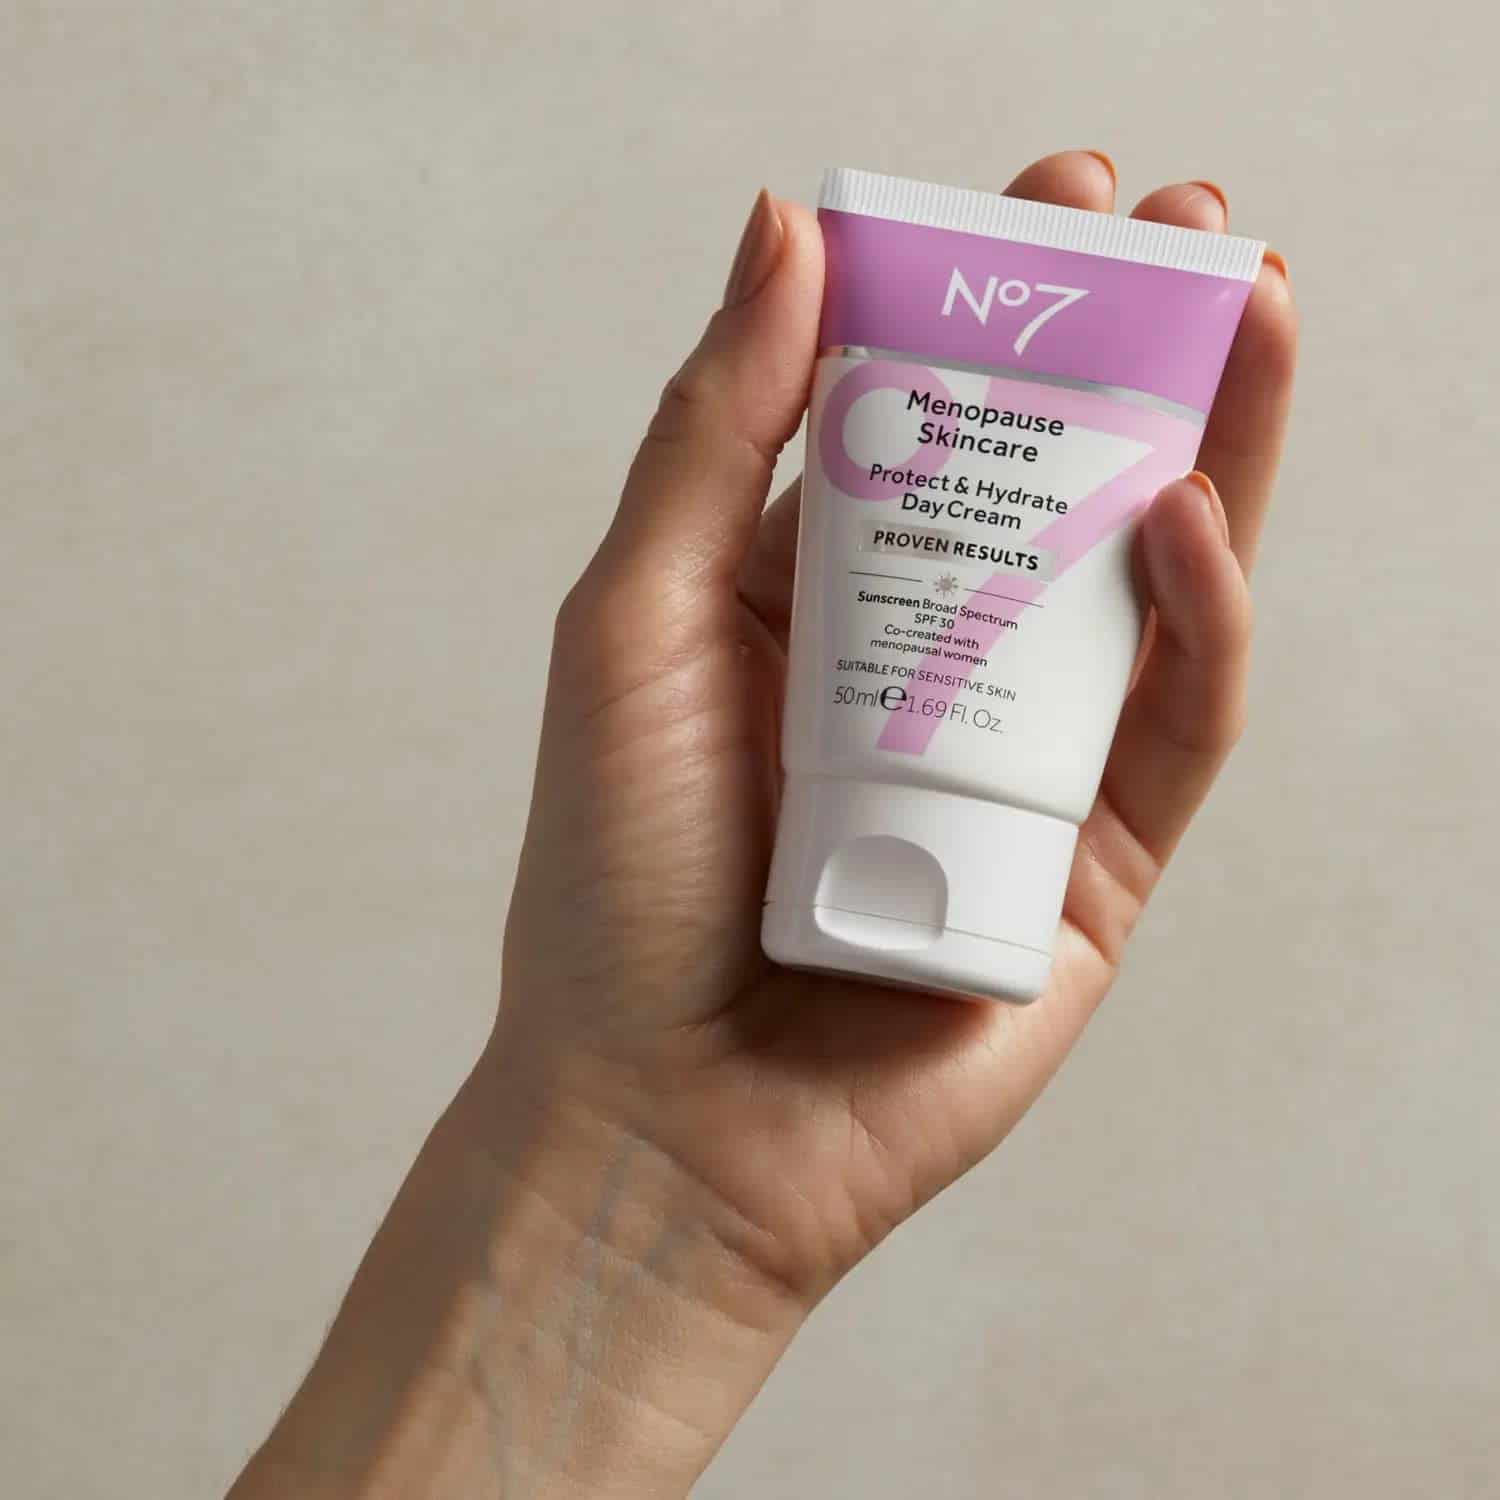 No7 Menopause Skincare Protect and Hydrate Day Cream 